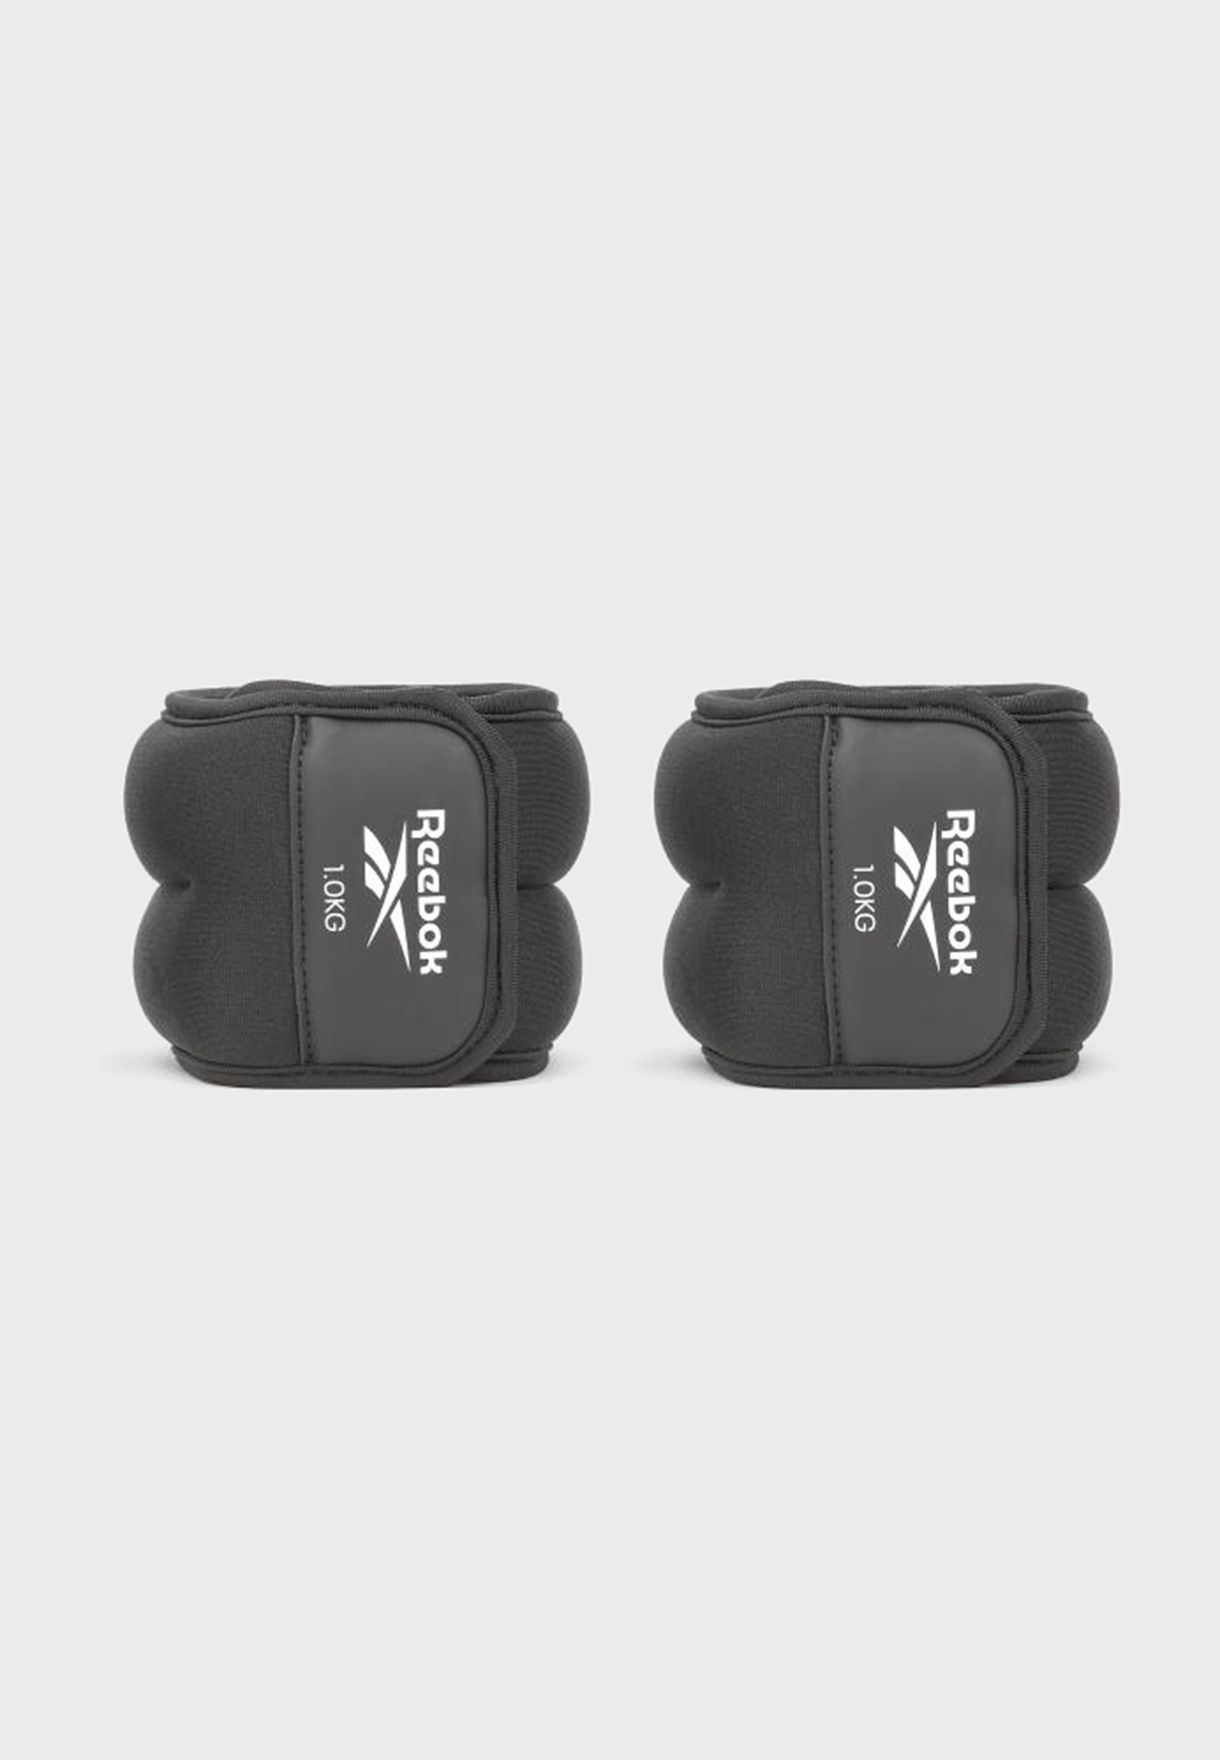 Logo Ankle Weights-1KG